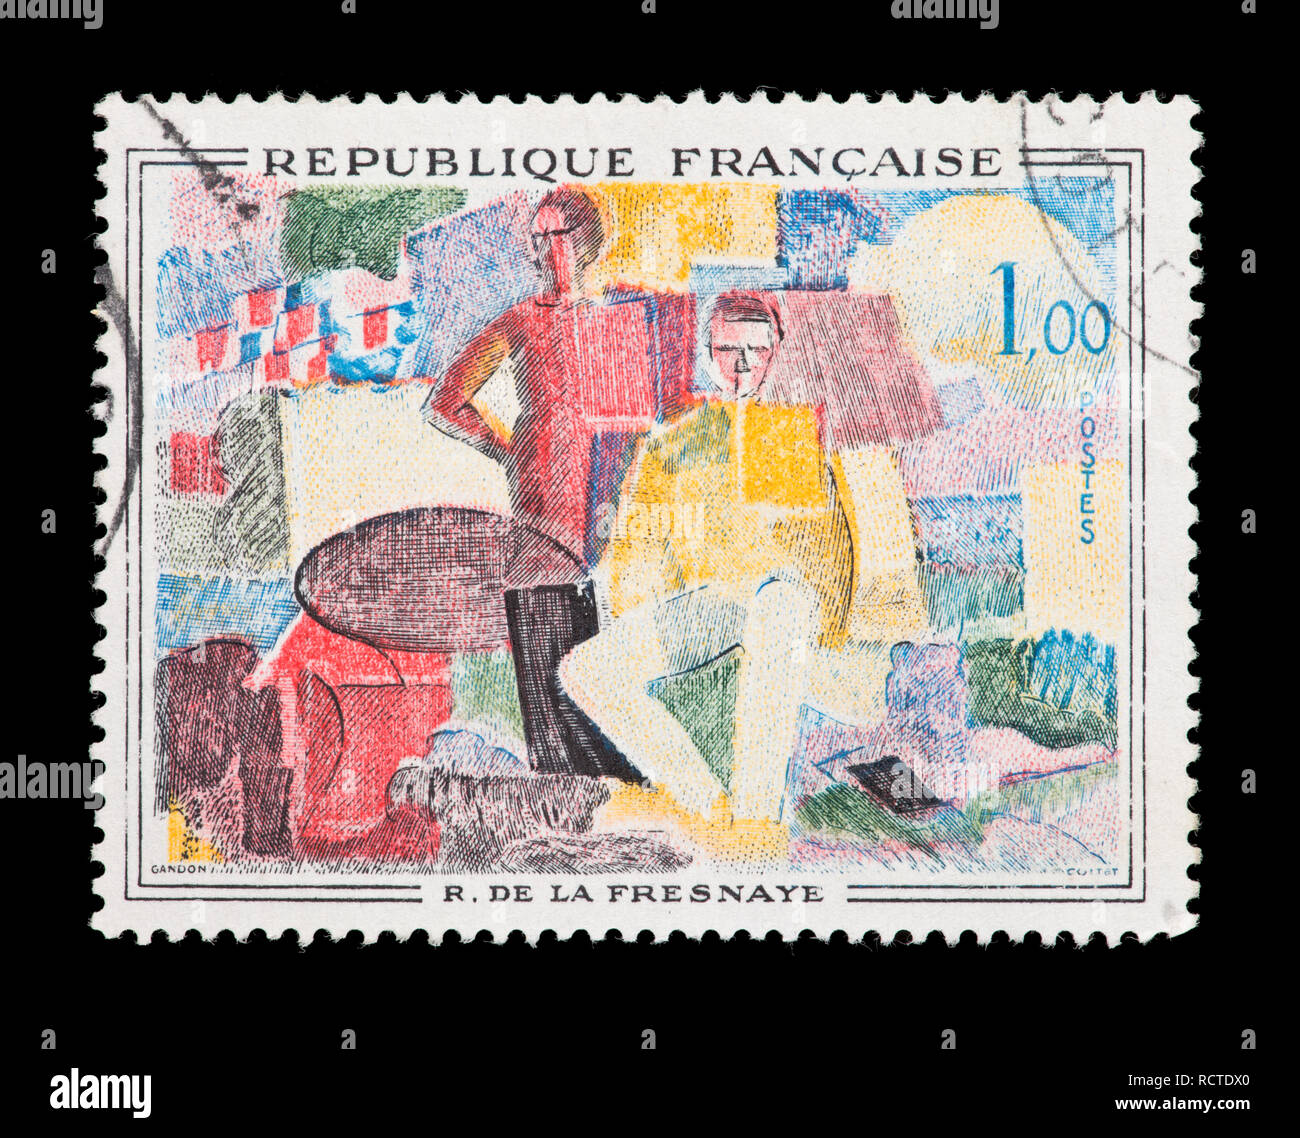 Postage stamp from France depicting the Roger de La Fresnaye painting 'The 14th July' Stock Photo